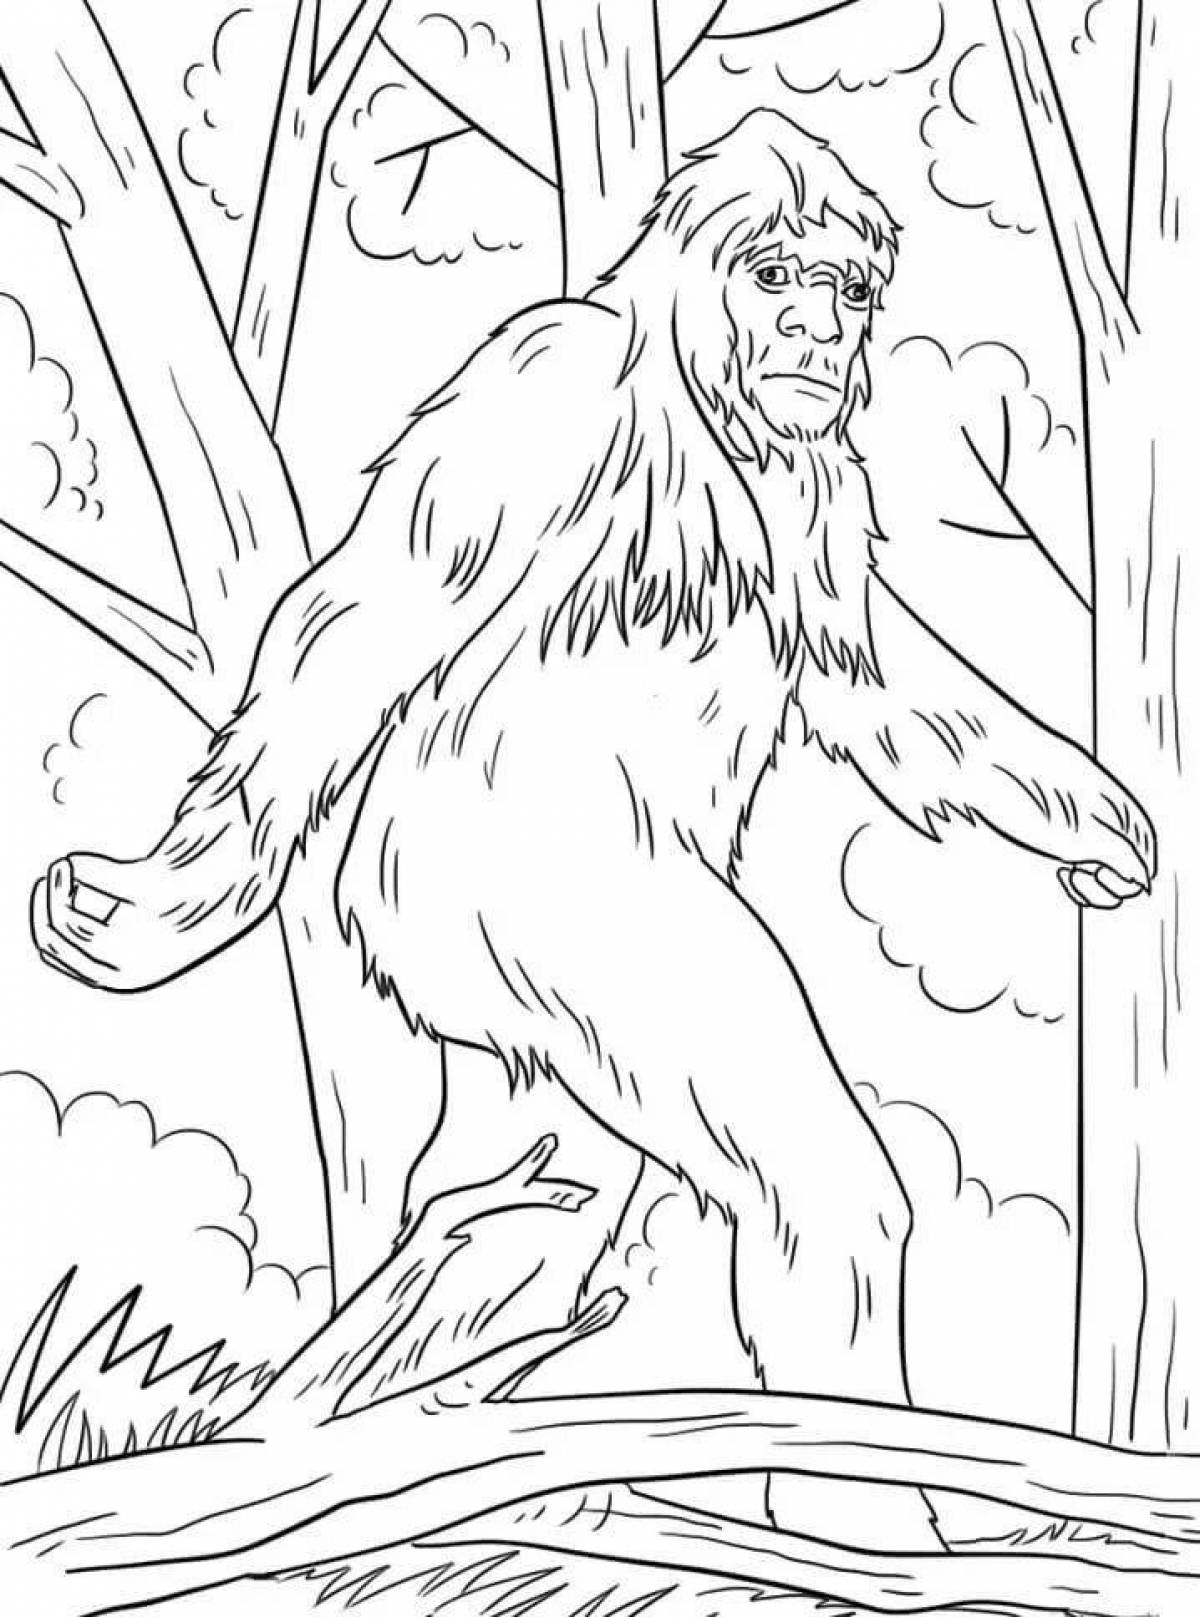 Amazing big foot coloring page